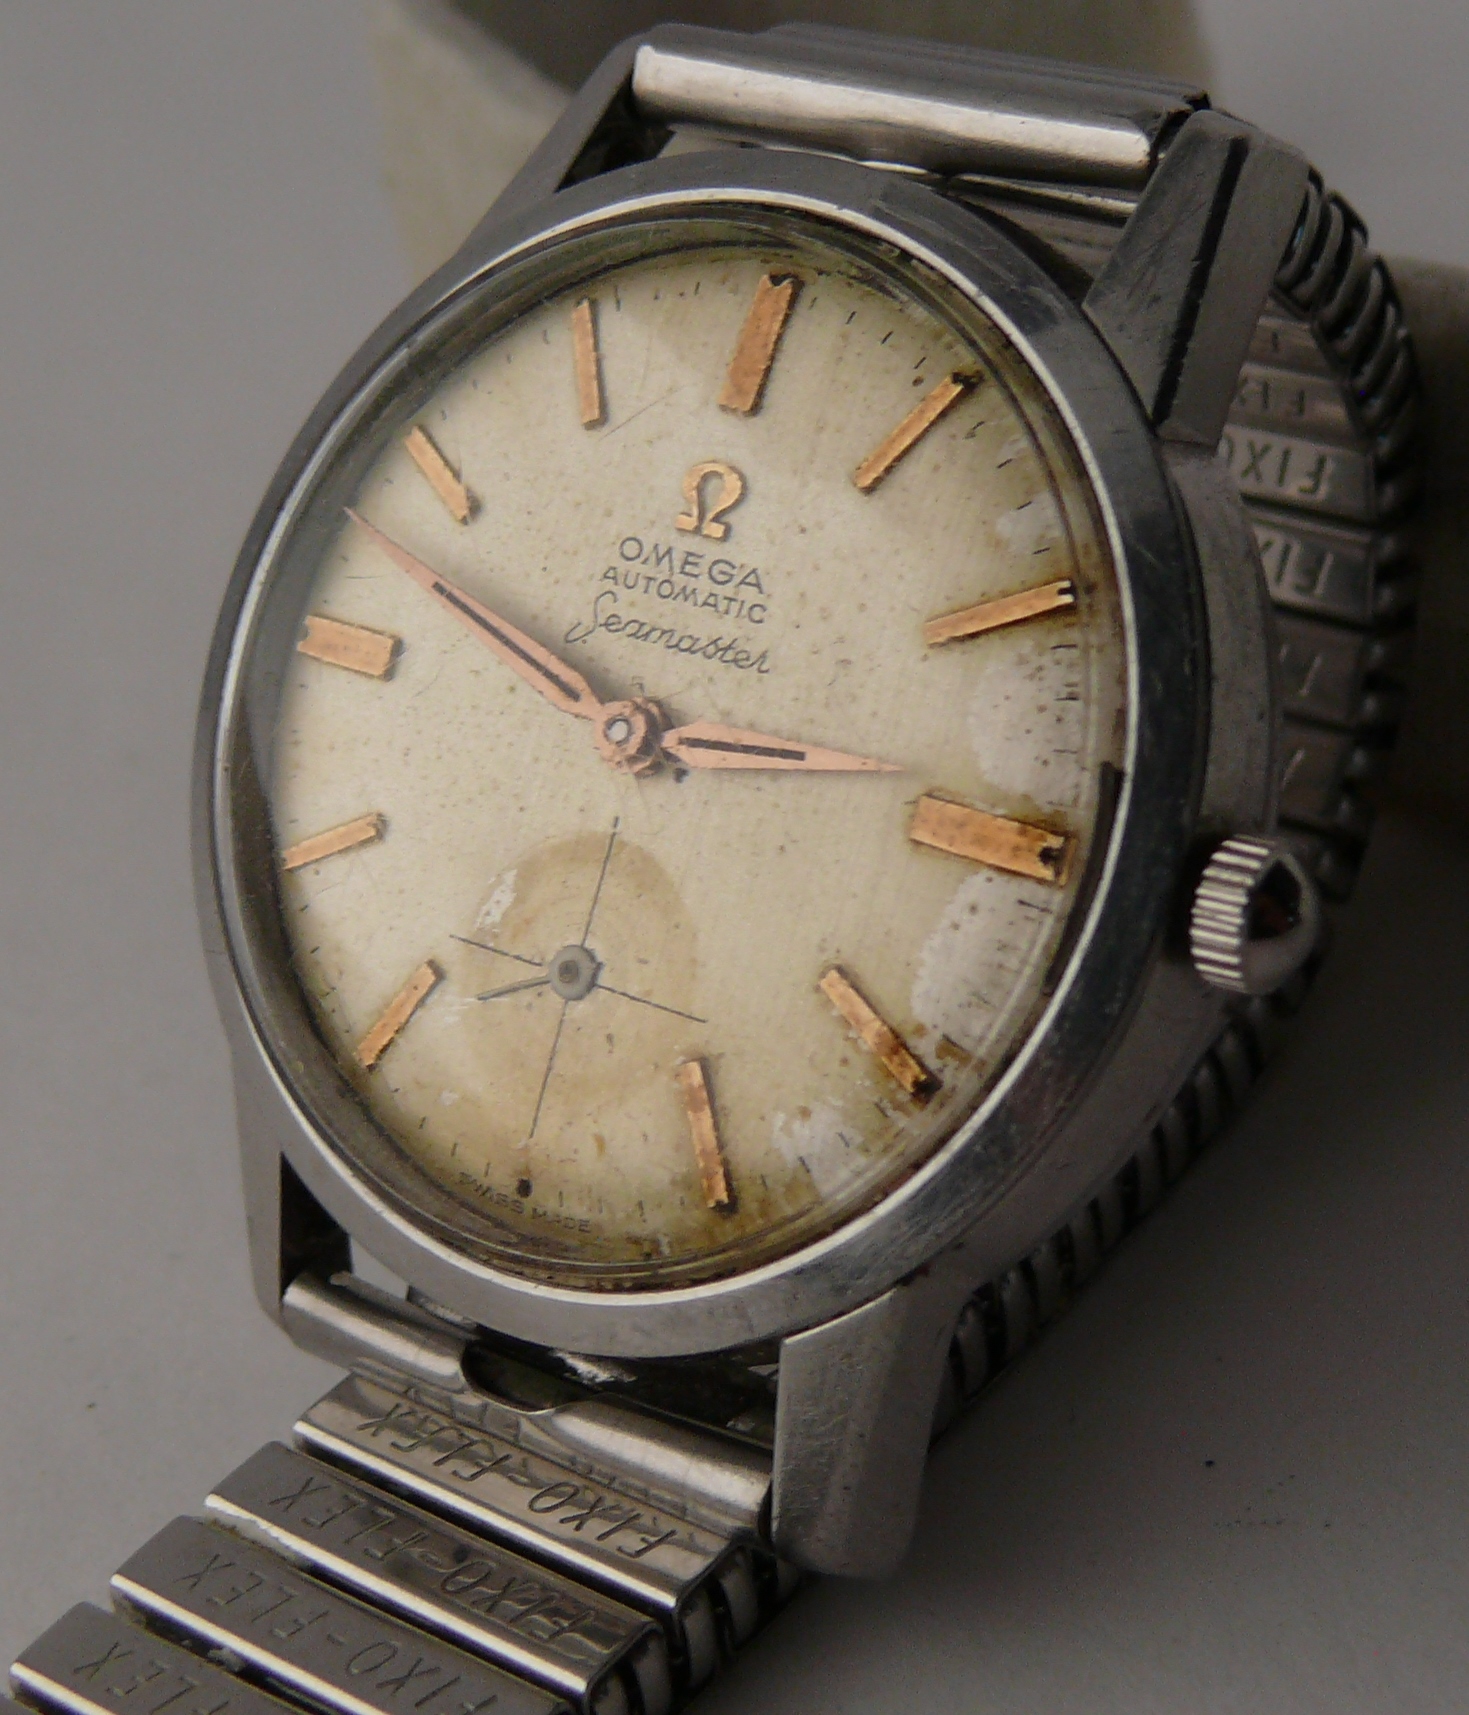 1961 Vintage Gents Omega Seamaster Automatic 14767 Wristwatch. Original dial and dagger hands show